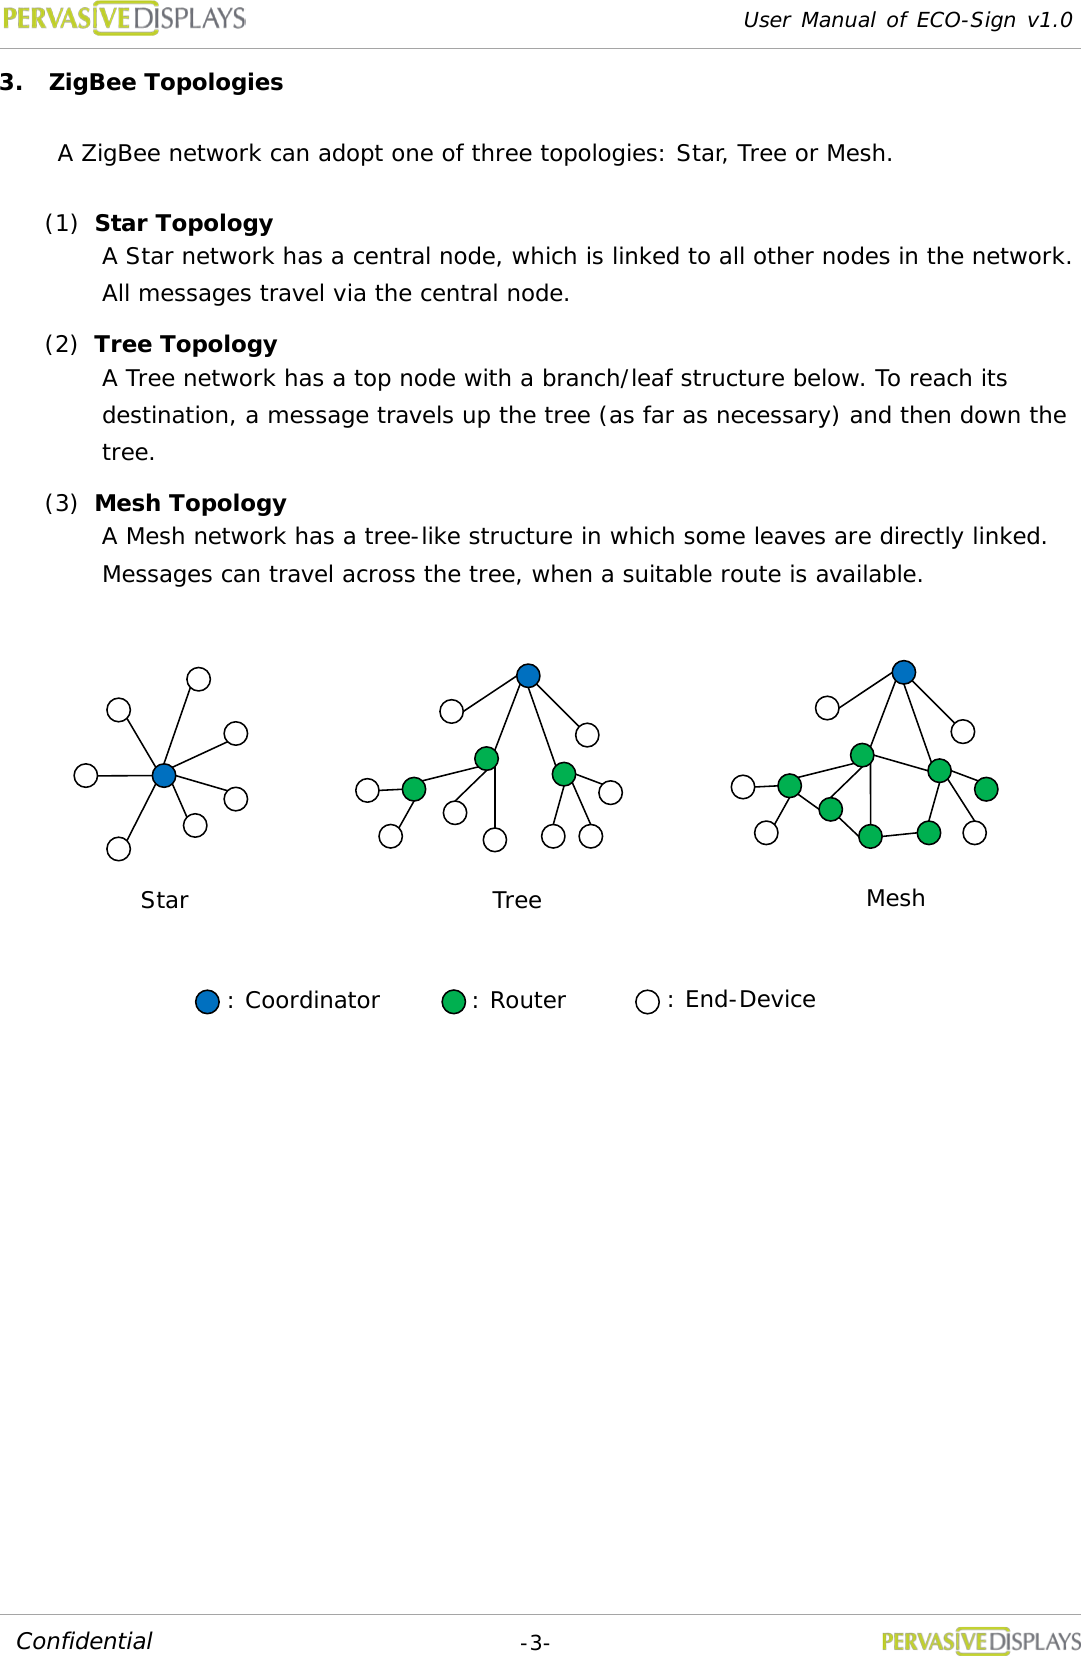 User Manual of ECO-Sign v1.0  -3- Confidential 3. ZigBee Topologies A ZigBee network can adopt one of three topologies: Star, Tree or Mesh. (1) Star Topology A Star network has a central node, which is linked to all other nodes in the network. All messages travel via the central node. (2) Tree Topology A Tree network has a top node with a branch/leaf structure below. To reach its destination, a message travels up the tree (as far as necessary) and then down the tree. (3) Mesh Topology A Mesh network has a tree-like structure in which some leaves are directly linked. Messages can travel across the tree, when a suitable route is available.    Star Tree Mesh : Coordinator : Router : End-Device 